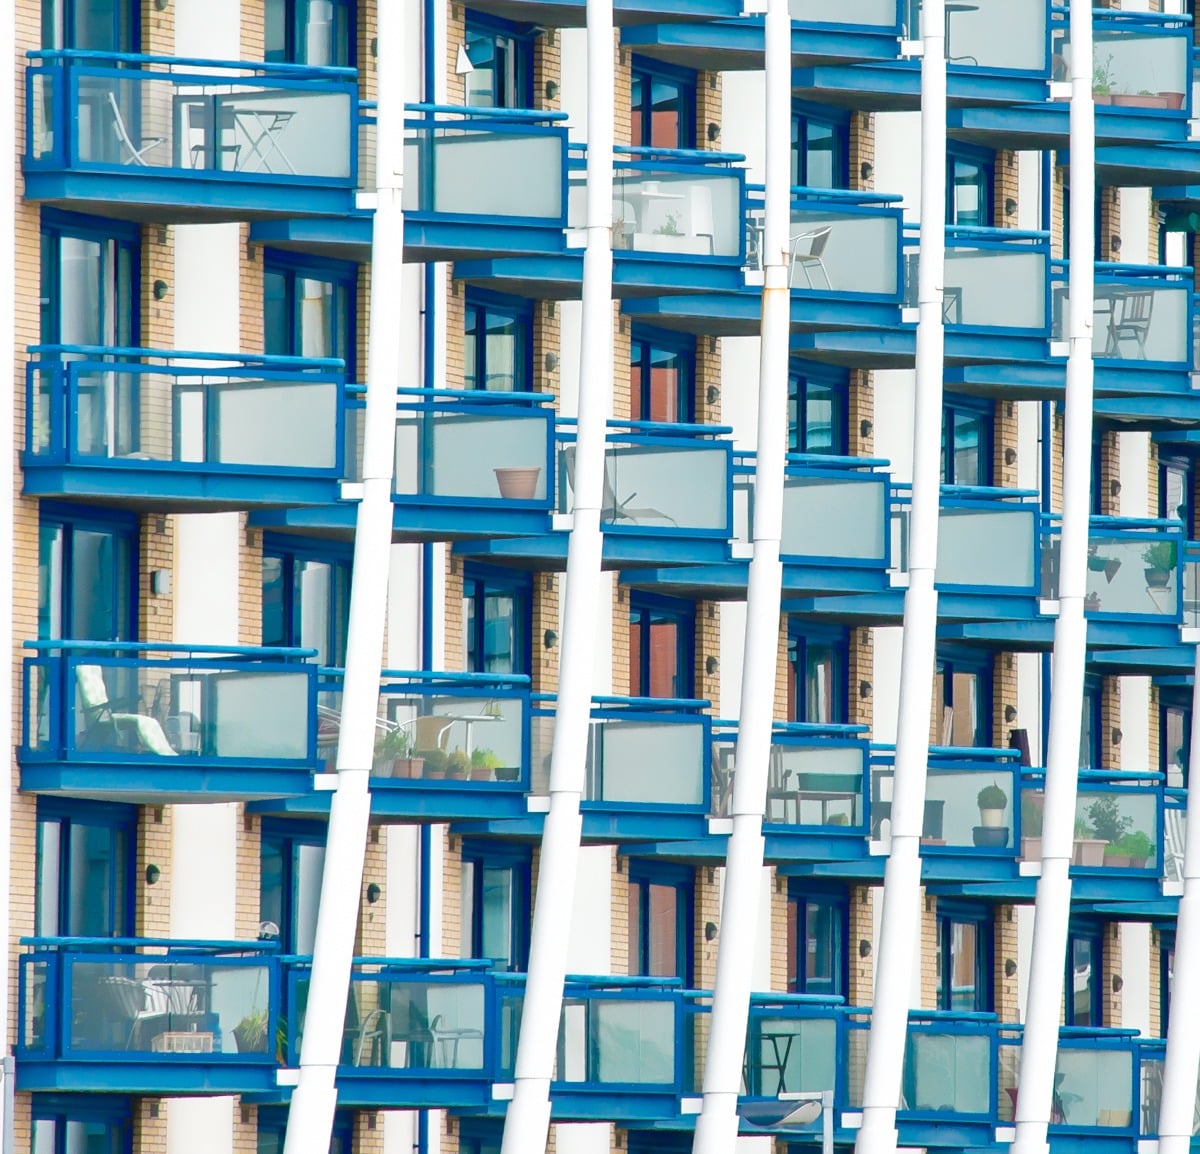 This is a detail of an apartment building along the Thames River taken from a ferry near South Dock Marina. This image is part of our London architectural abstracts portfolio.